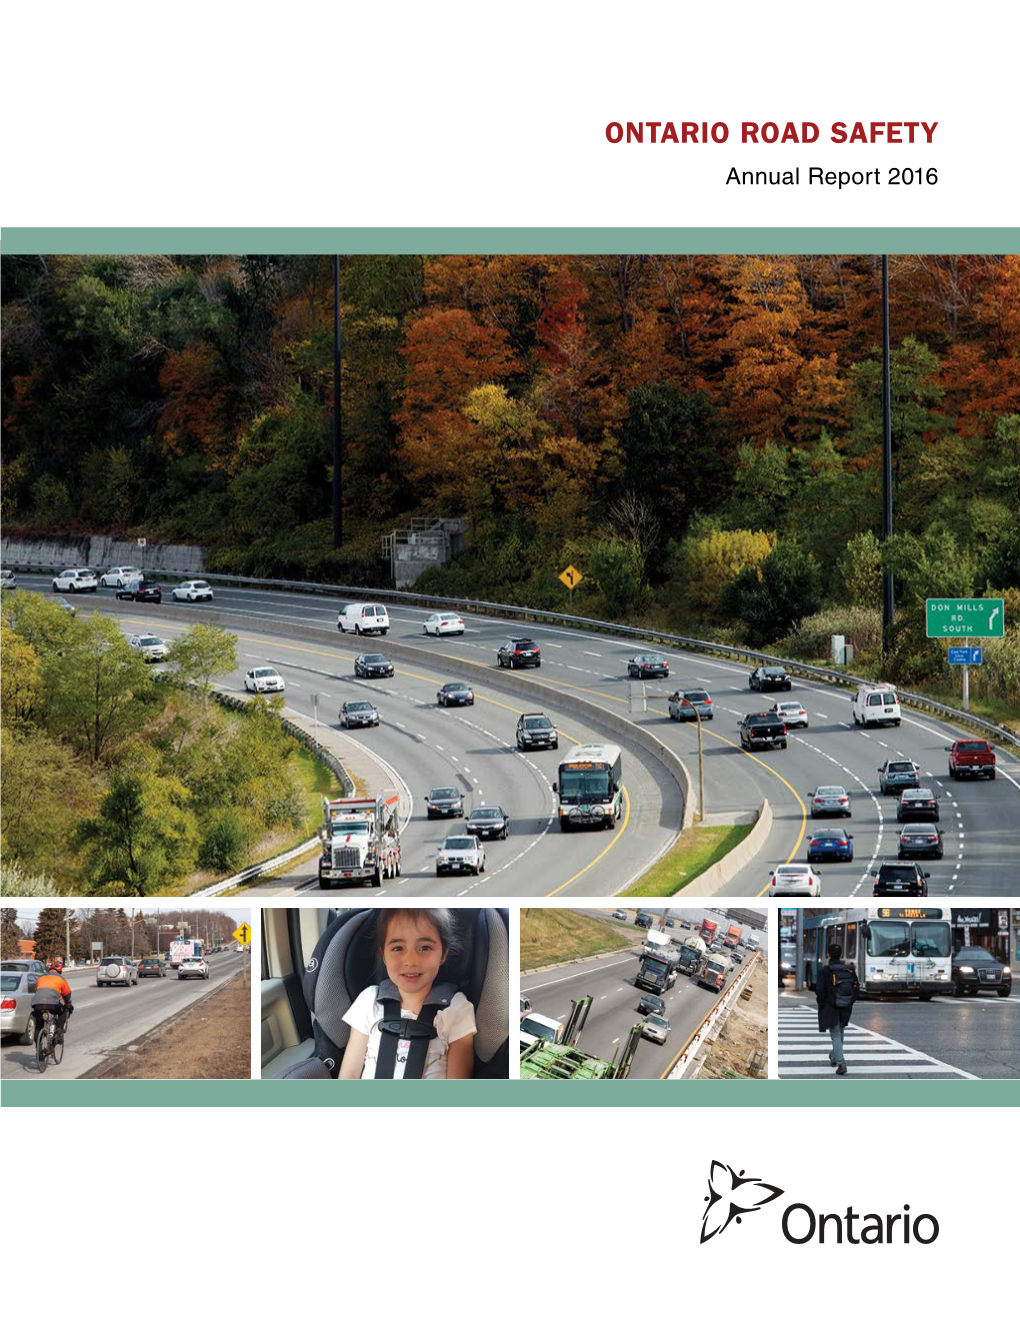 ONTARIO ROAD SAFETY: Annual Report 2016